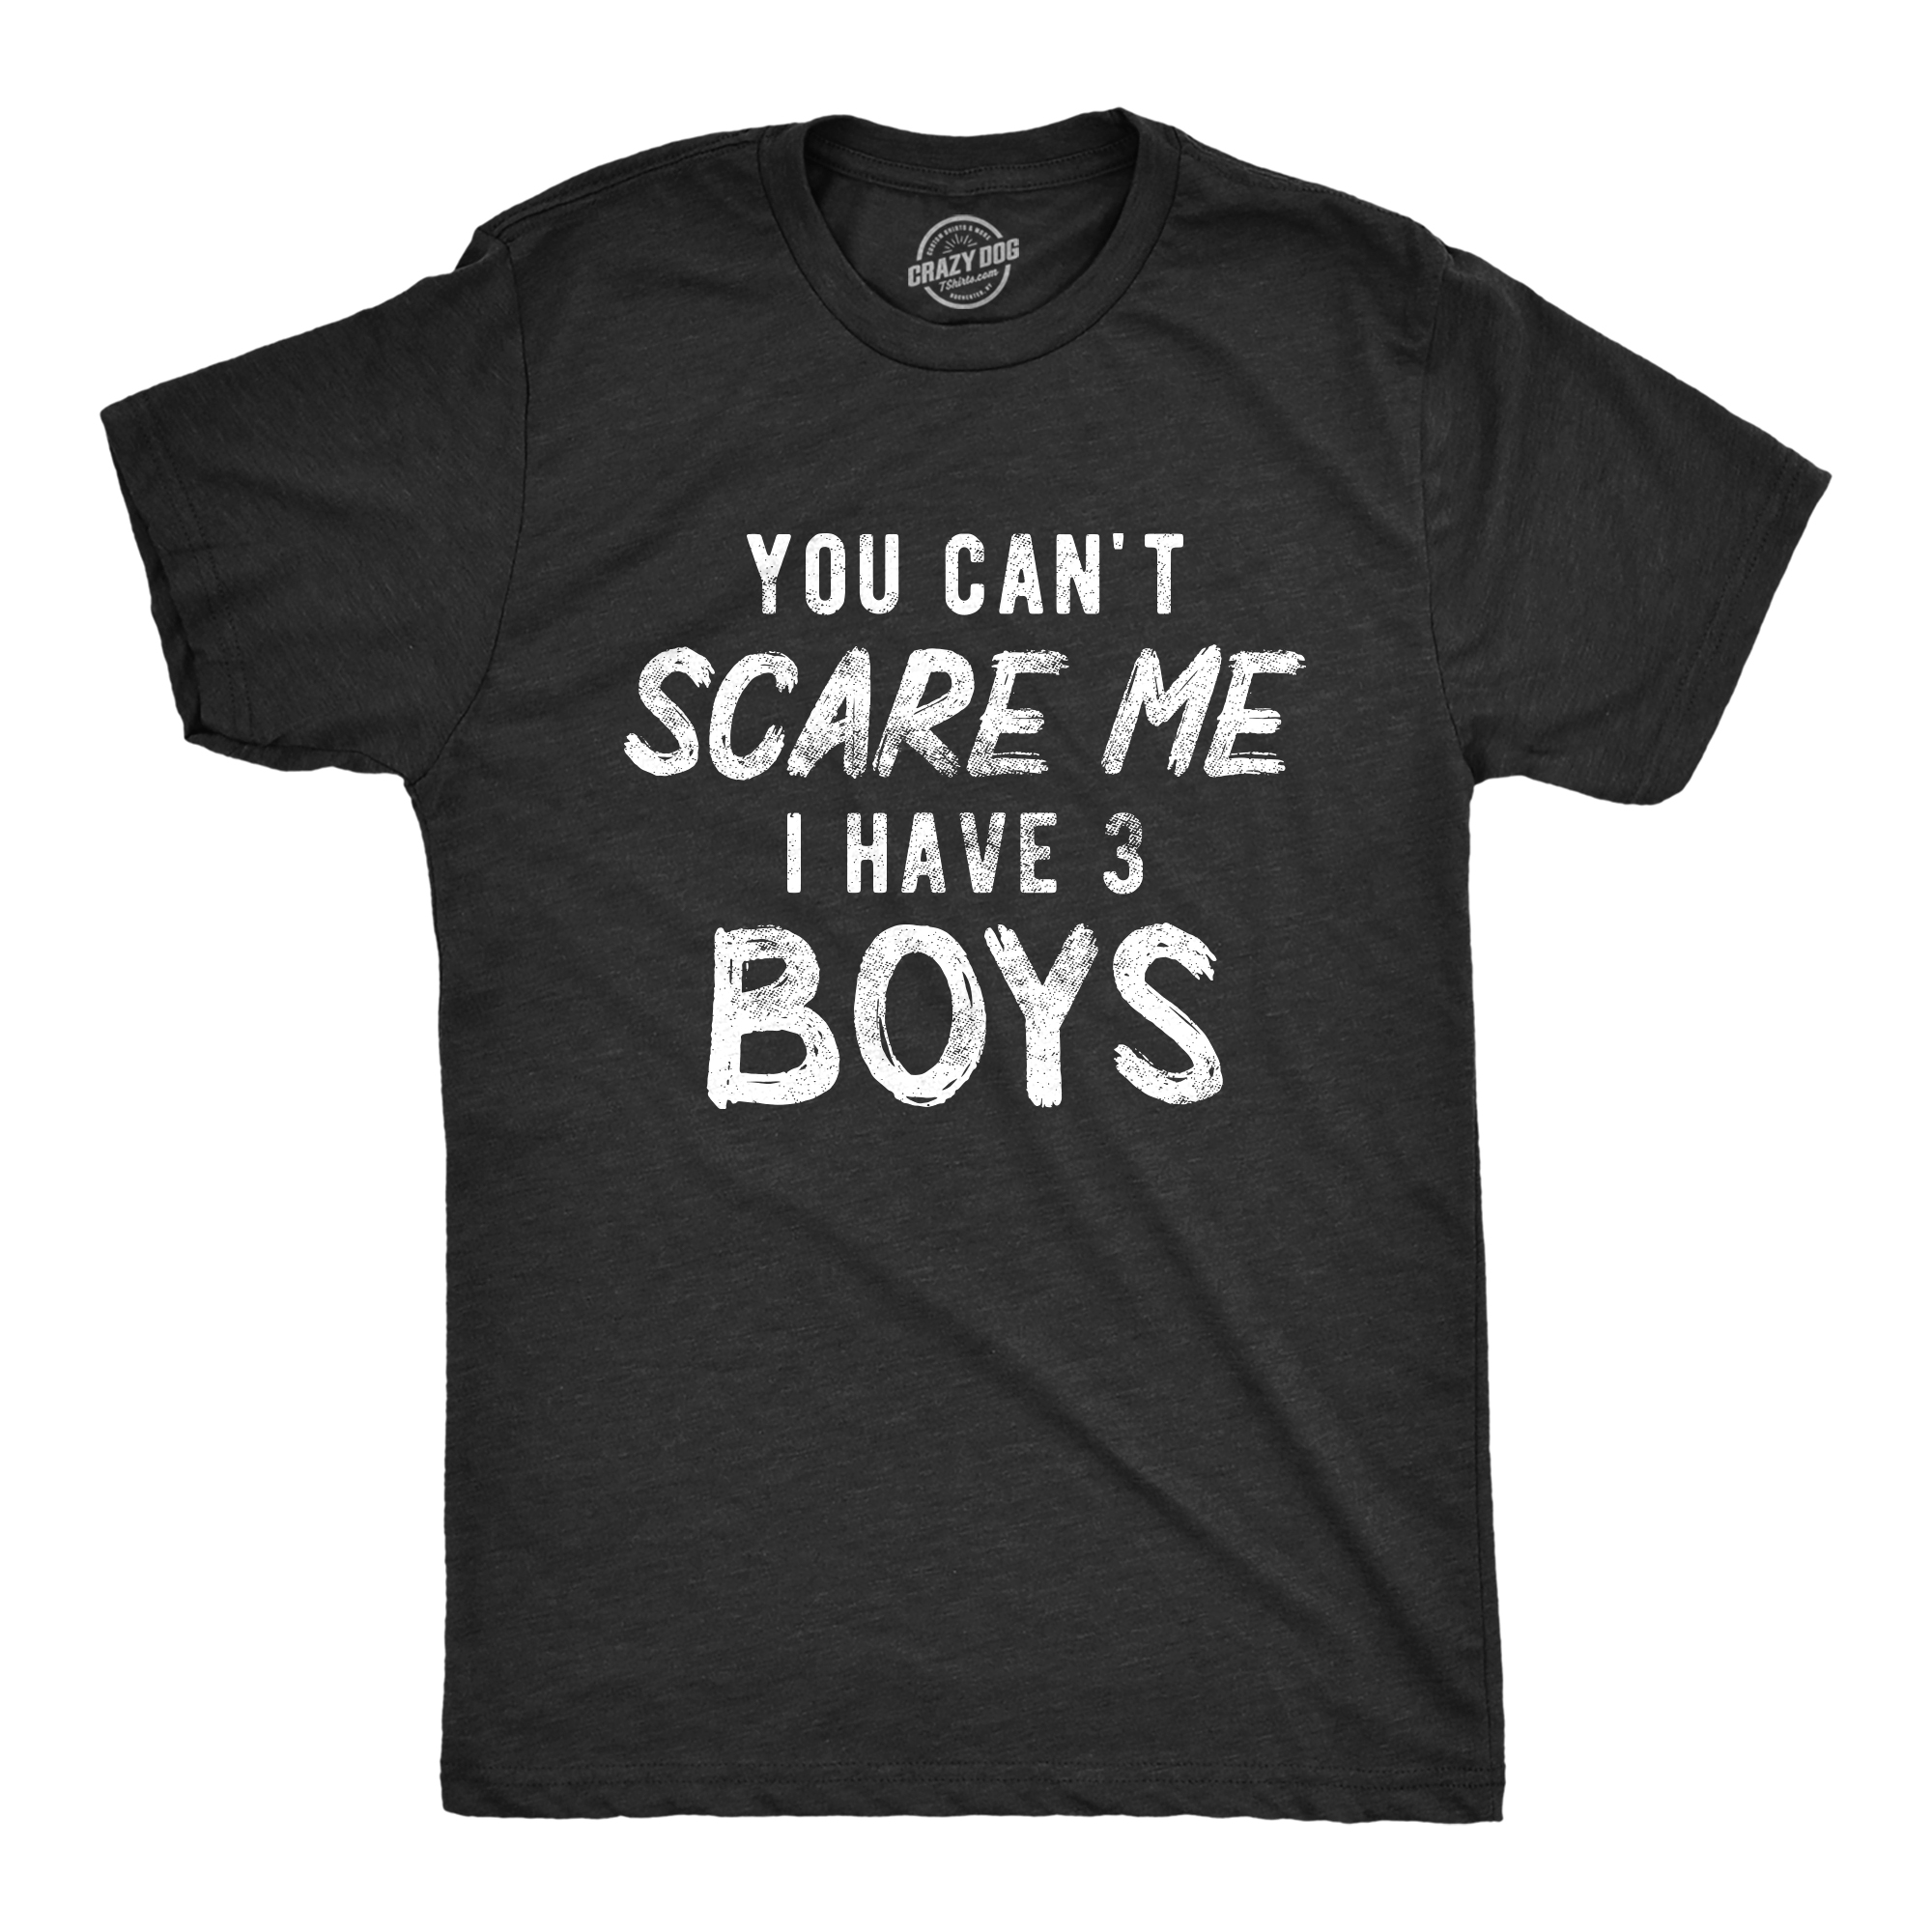 Crazy Dog Tshirts Mens You Can't Scare Me I Have Three Boys Tshirt Funny Parenting Fathers Day Tee